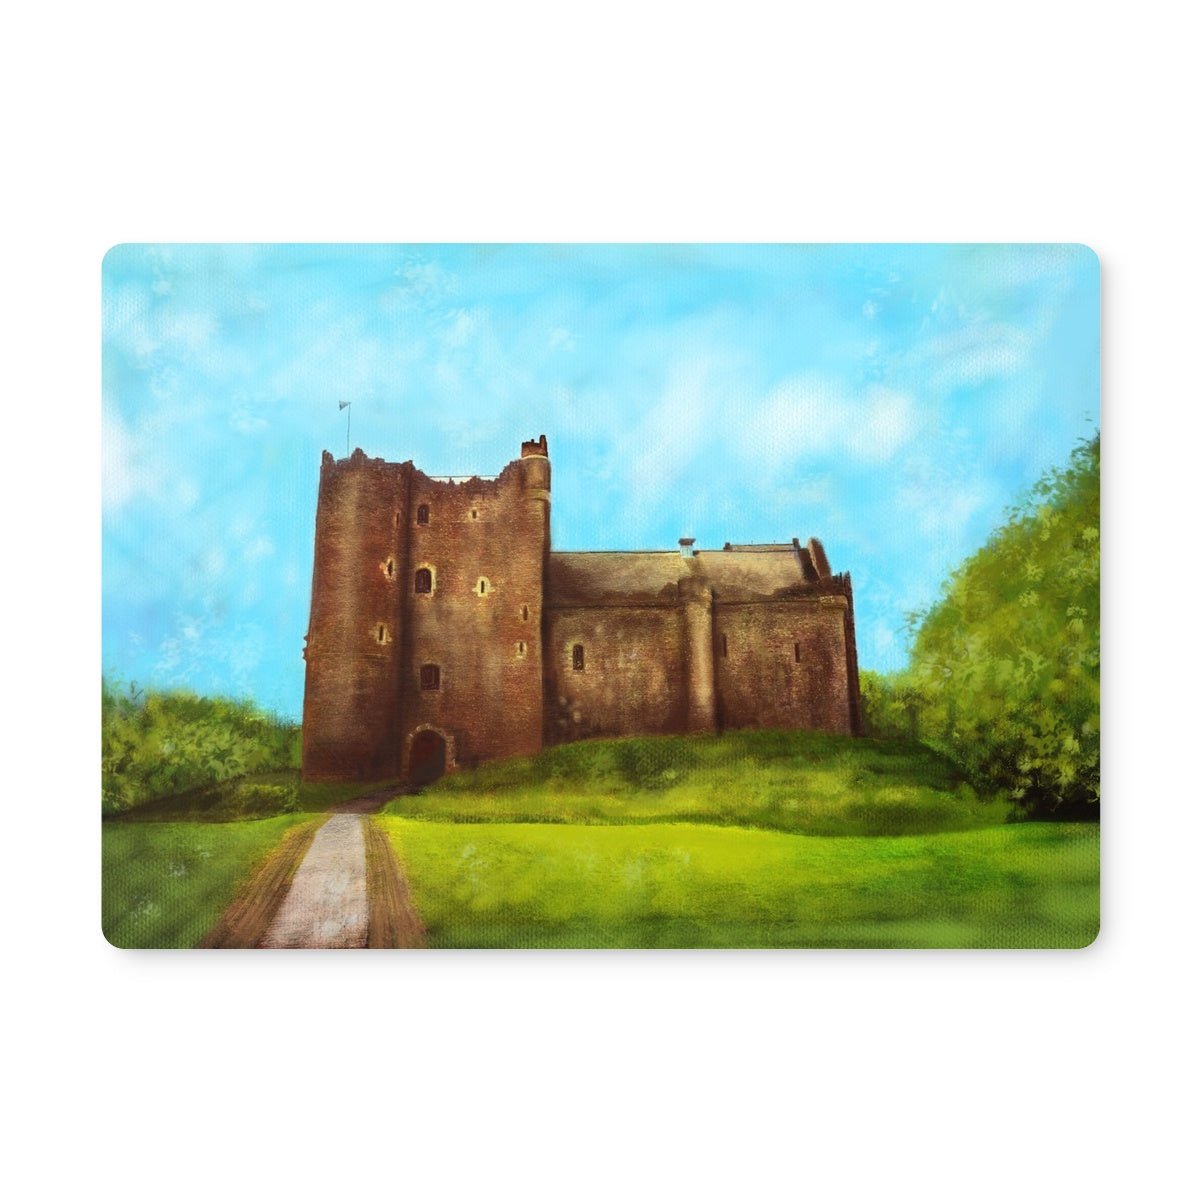 Doune Castle Art Gifts Placemat-Placemats-Scottish Castles Art Gallery-6 Placemats-Paintings, Prints, Homeware, Art Gifts From Scotland By Scottish Artist Kevin Hunter